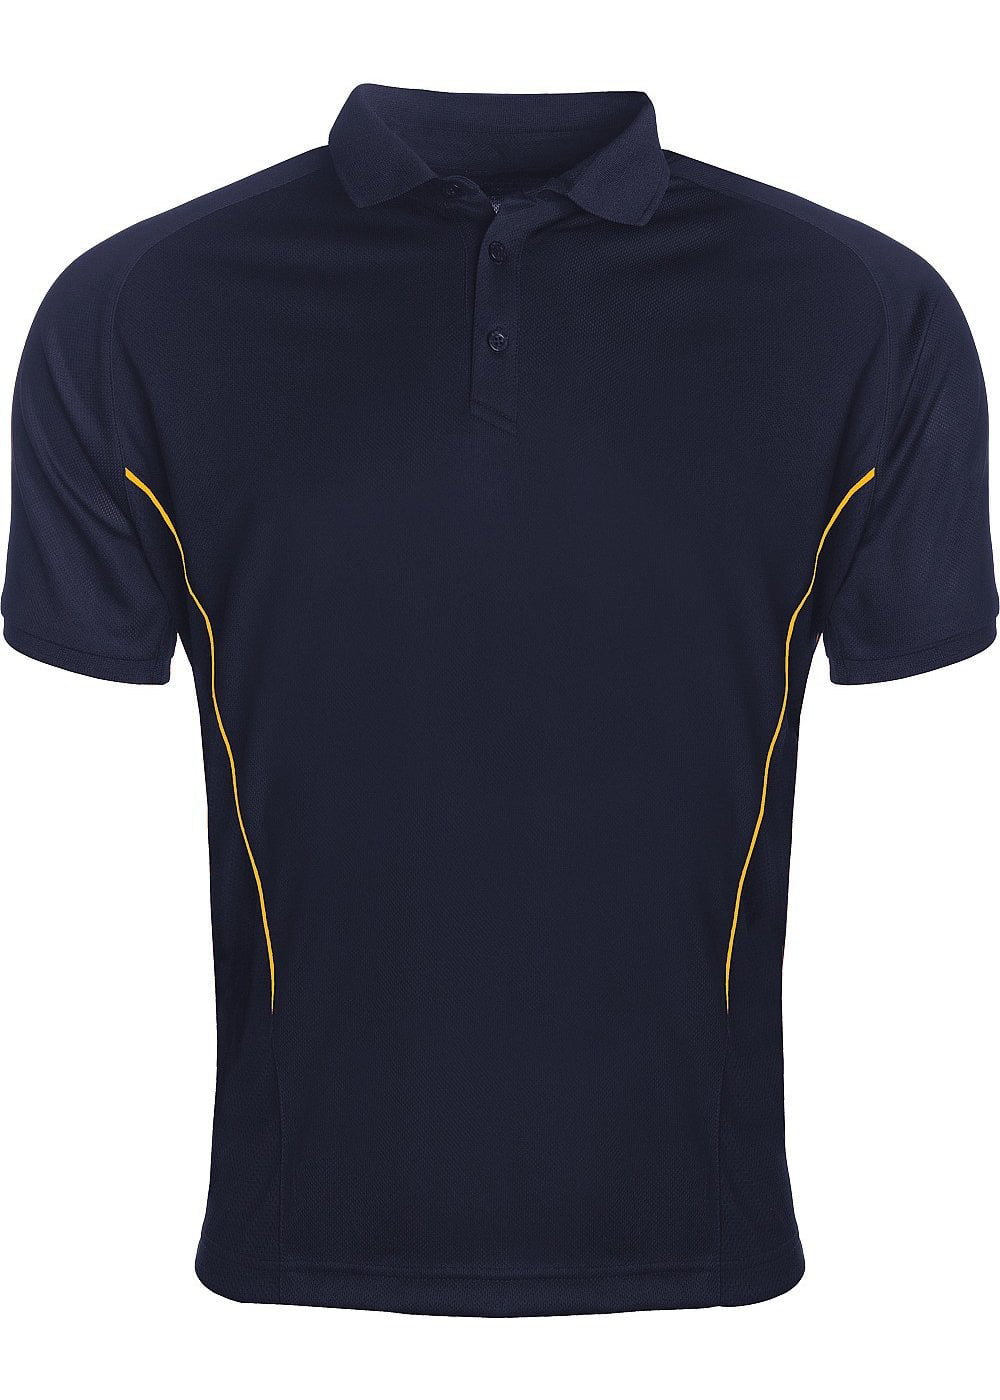 Navy And Gold Boys Sports Polo